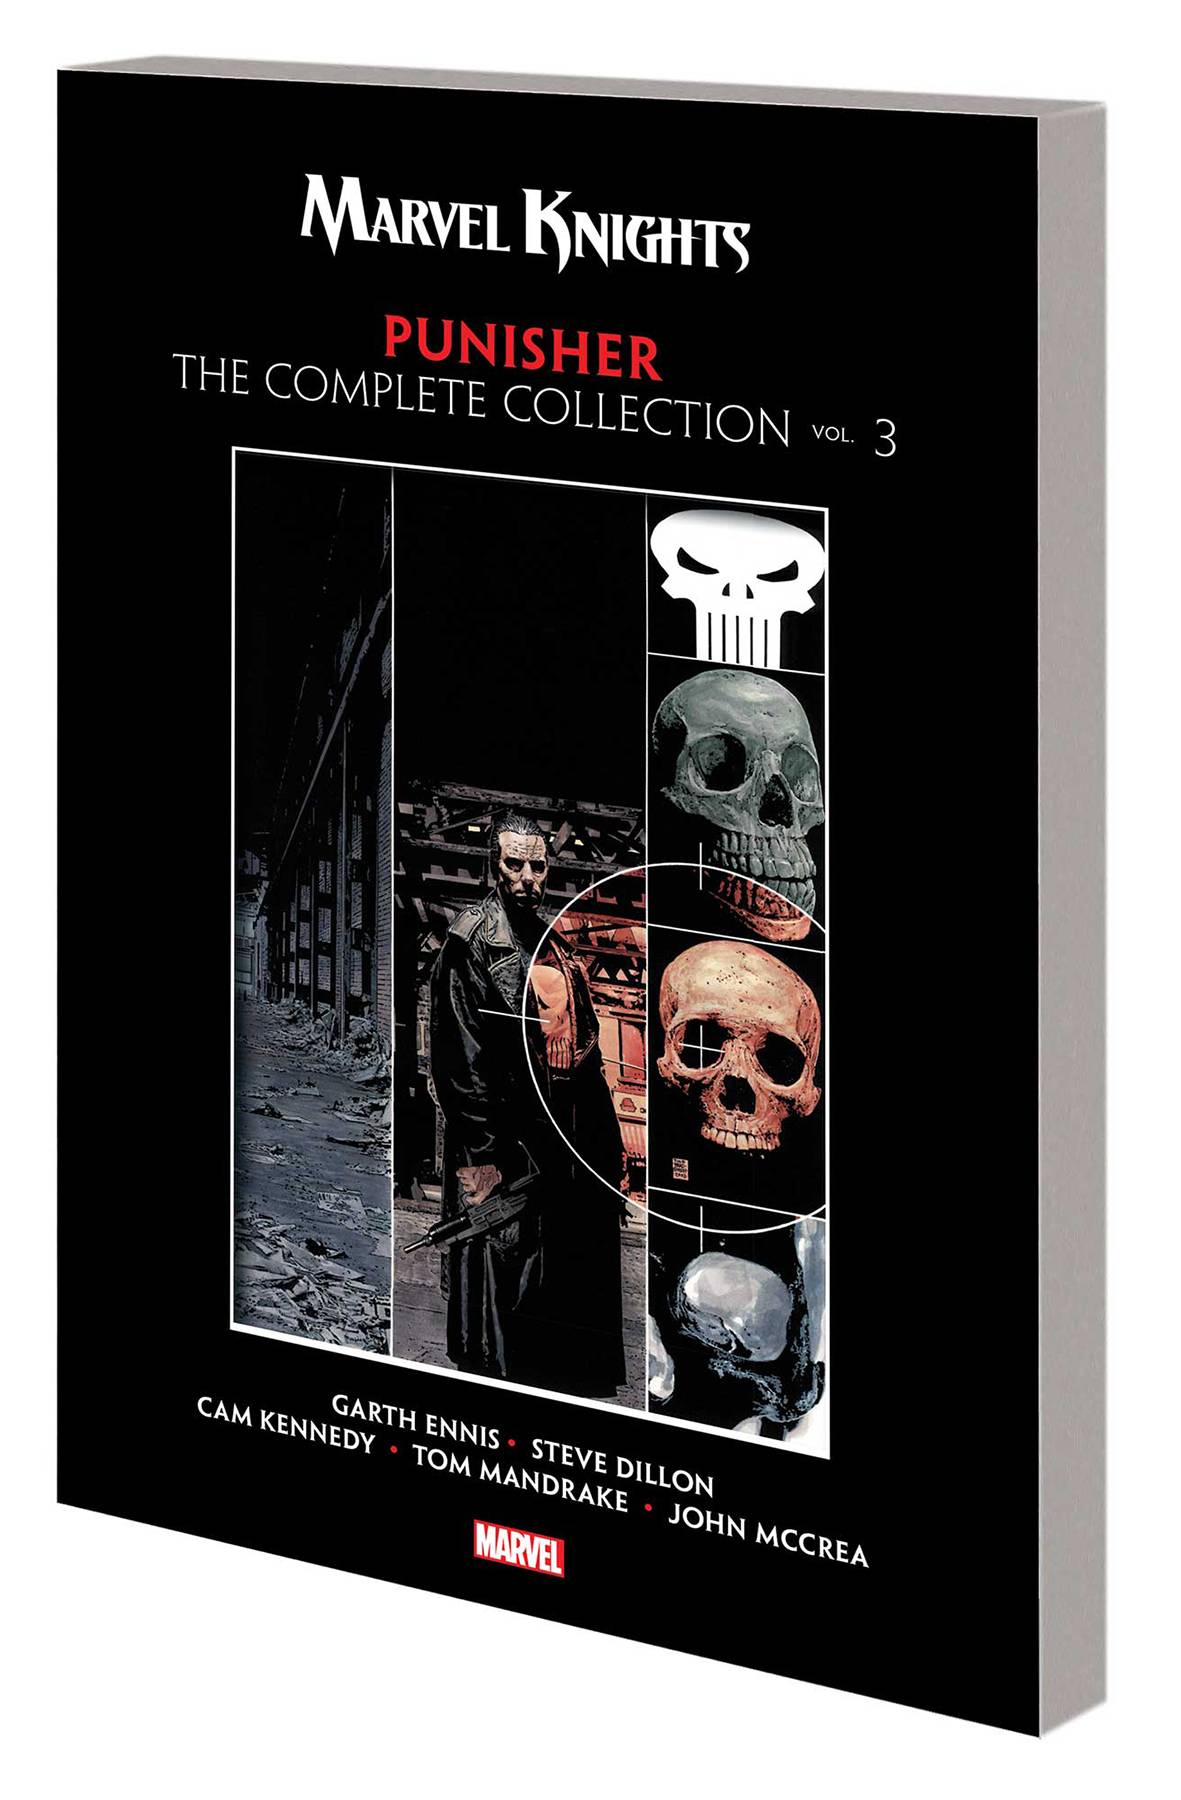 MARVEL KNIGHTS PUNISHER by Garth Ennis COMPLETE COLLECTION VOL 03